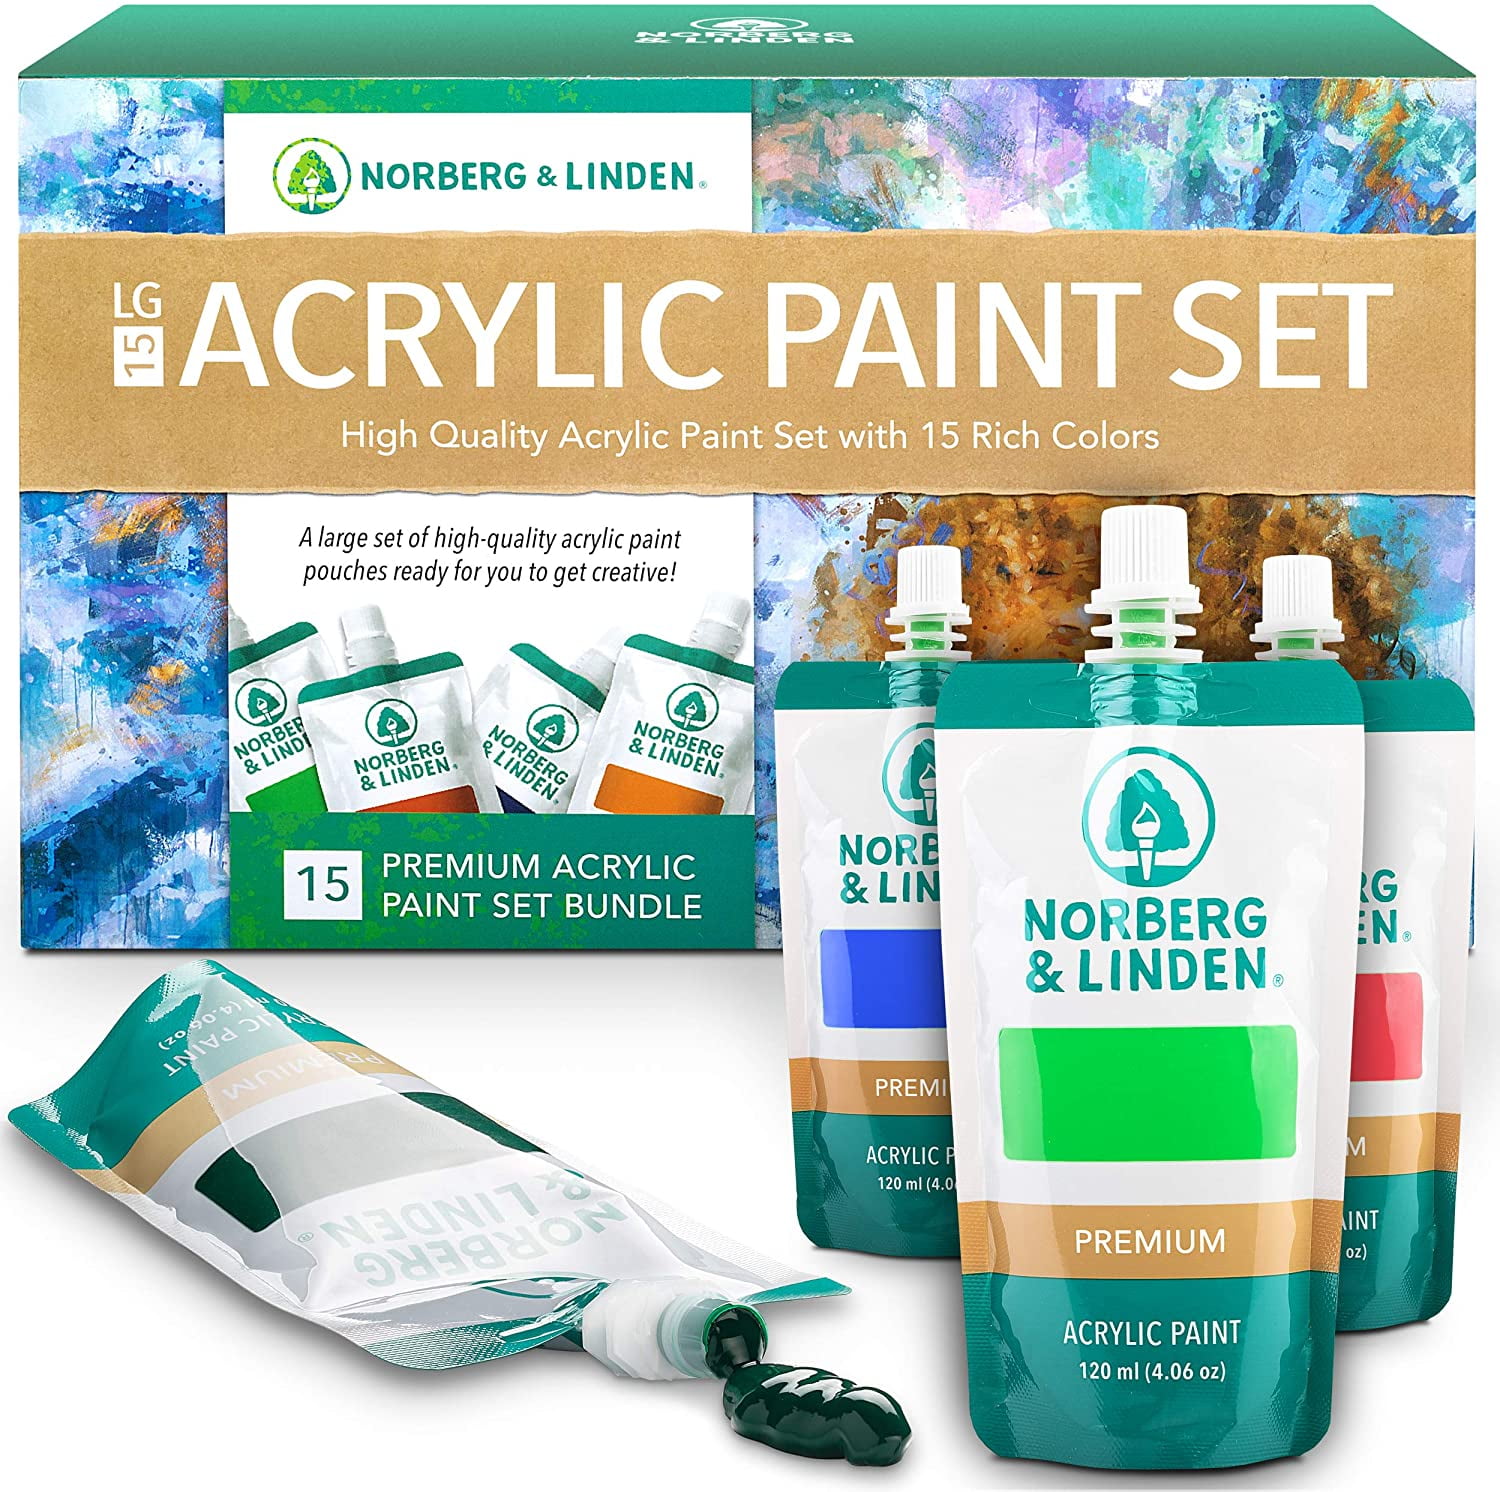 Norberg & Linden Acrylic Paint Set - Canvas and Acrylic Paint Sets for  Adults, Teens, Kids - Arts Crafts Painting Kit with Supplies - Includes 36